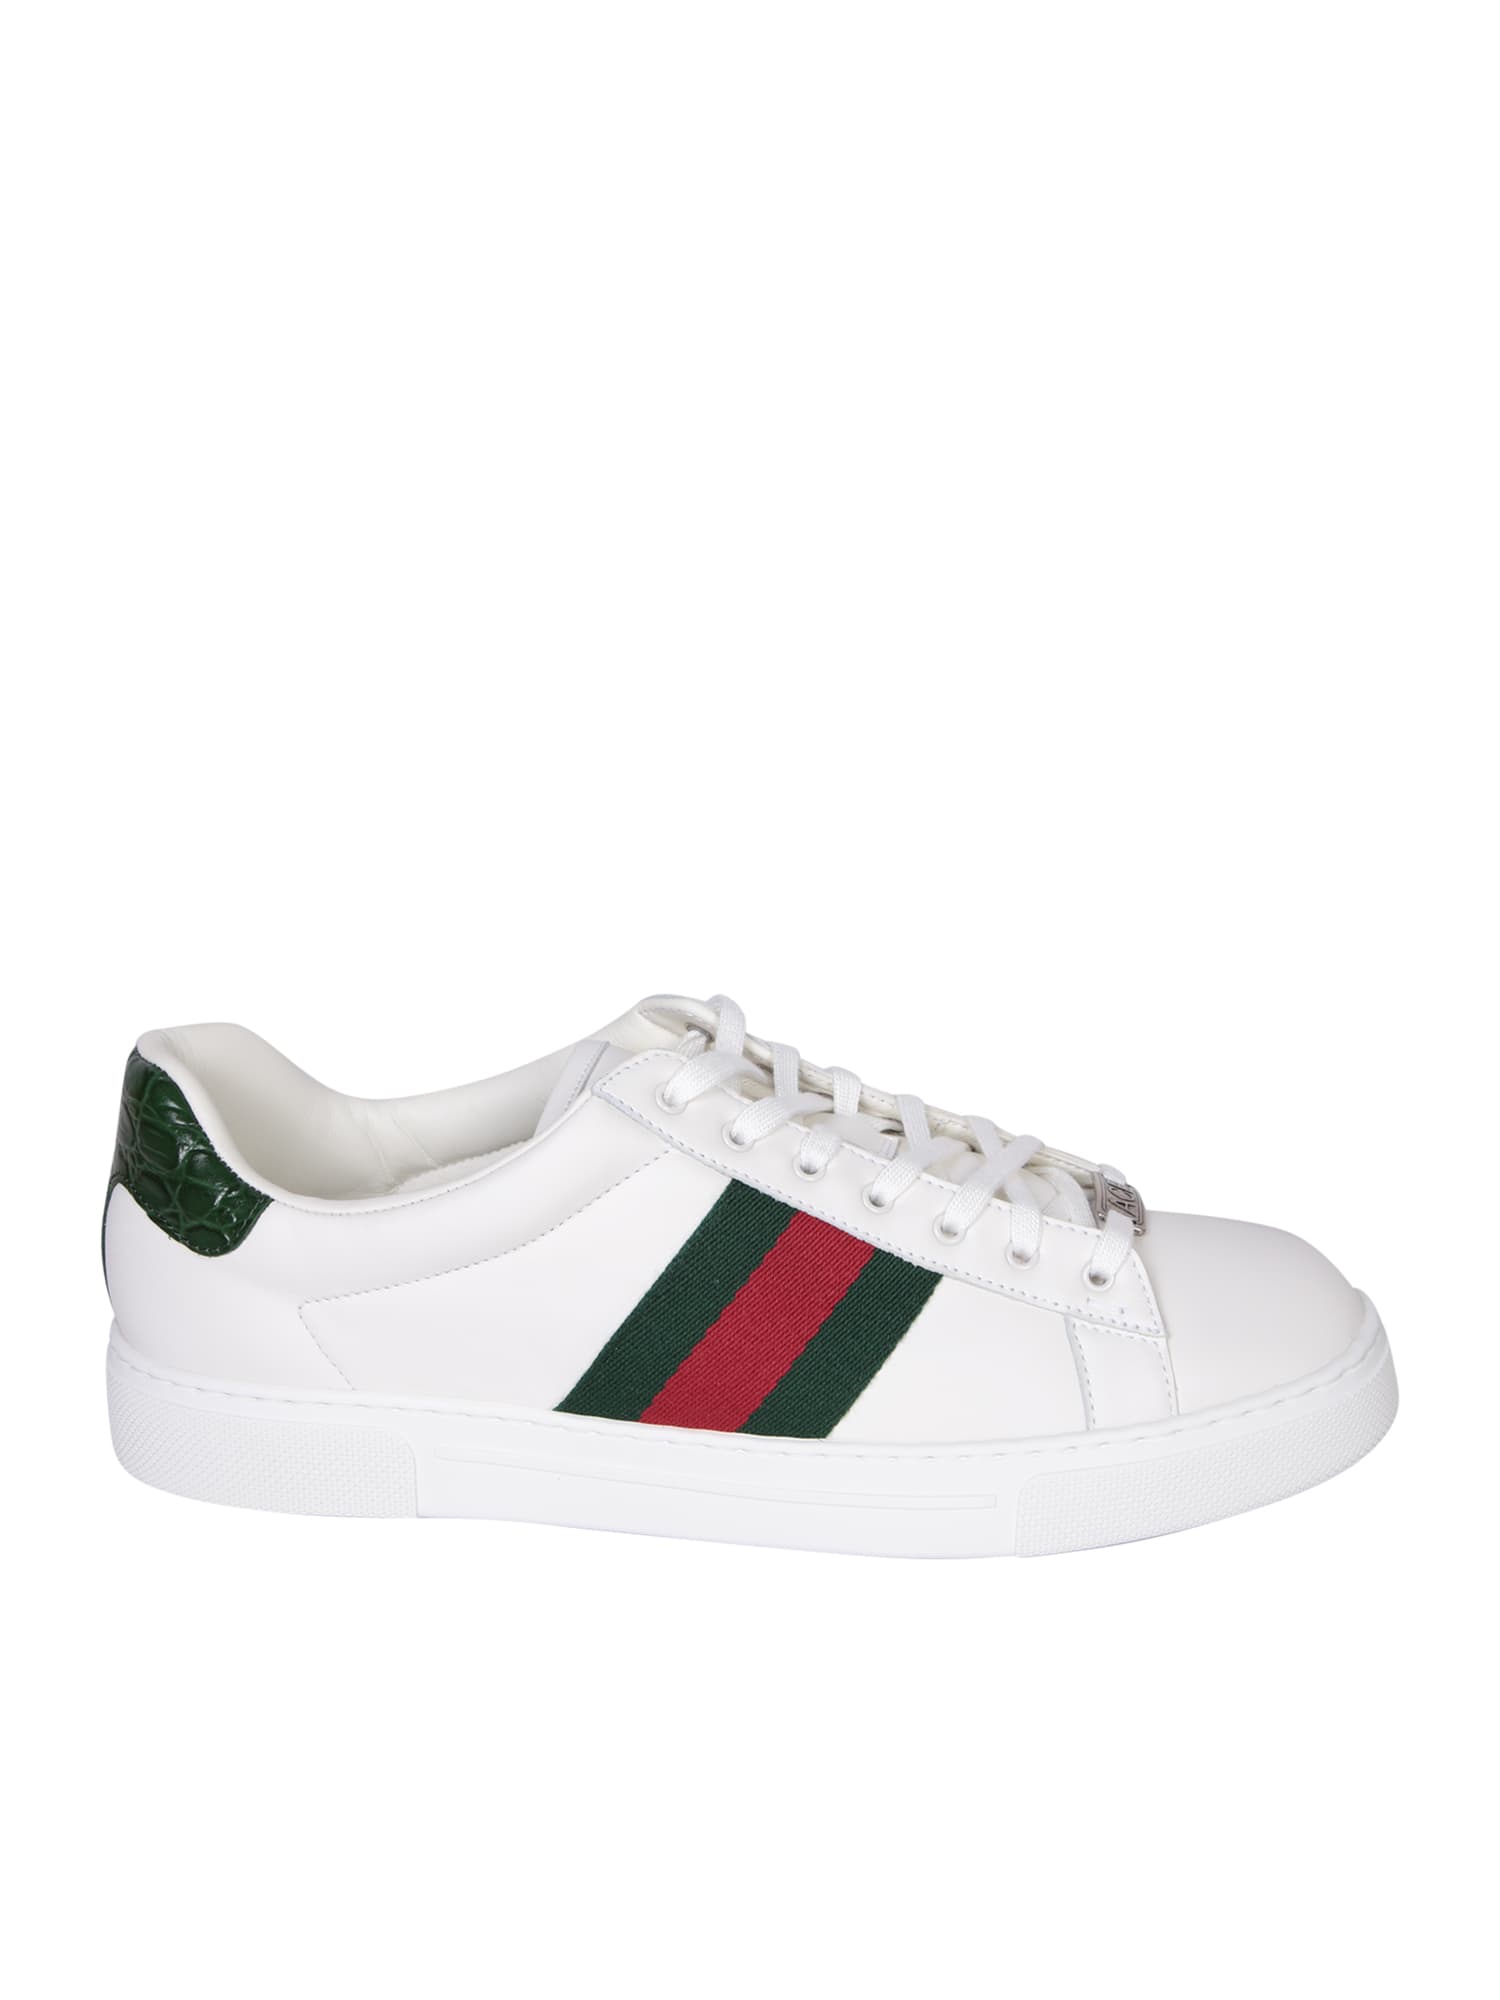 Gucci Ace White Sneakers